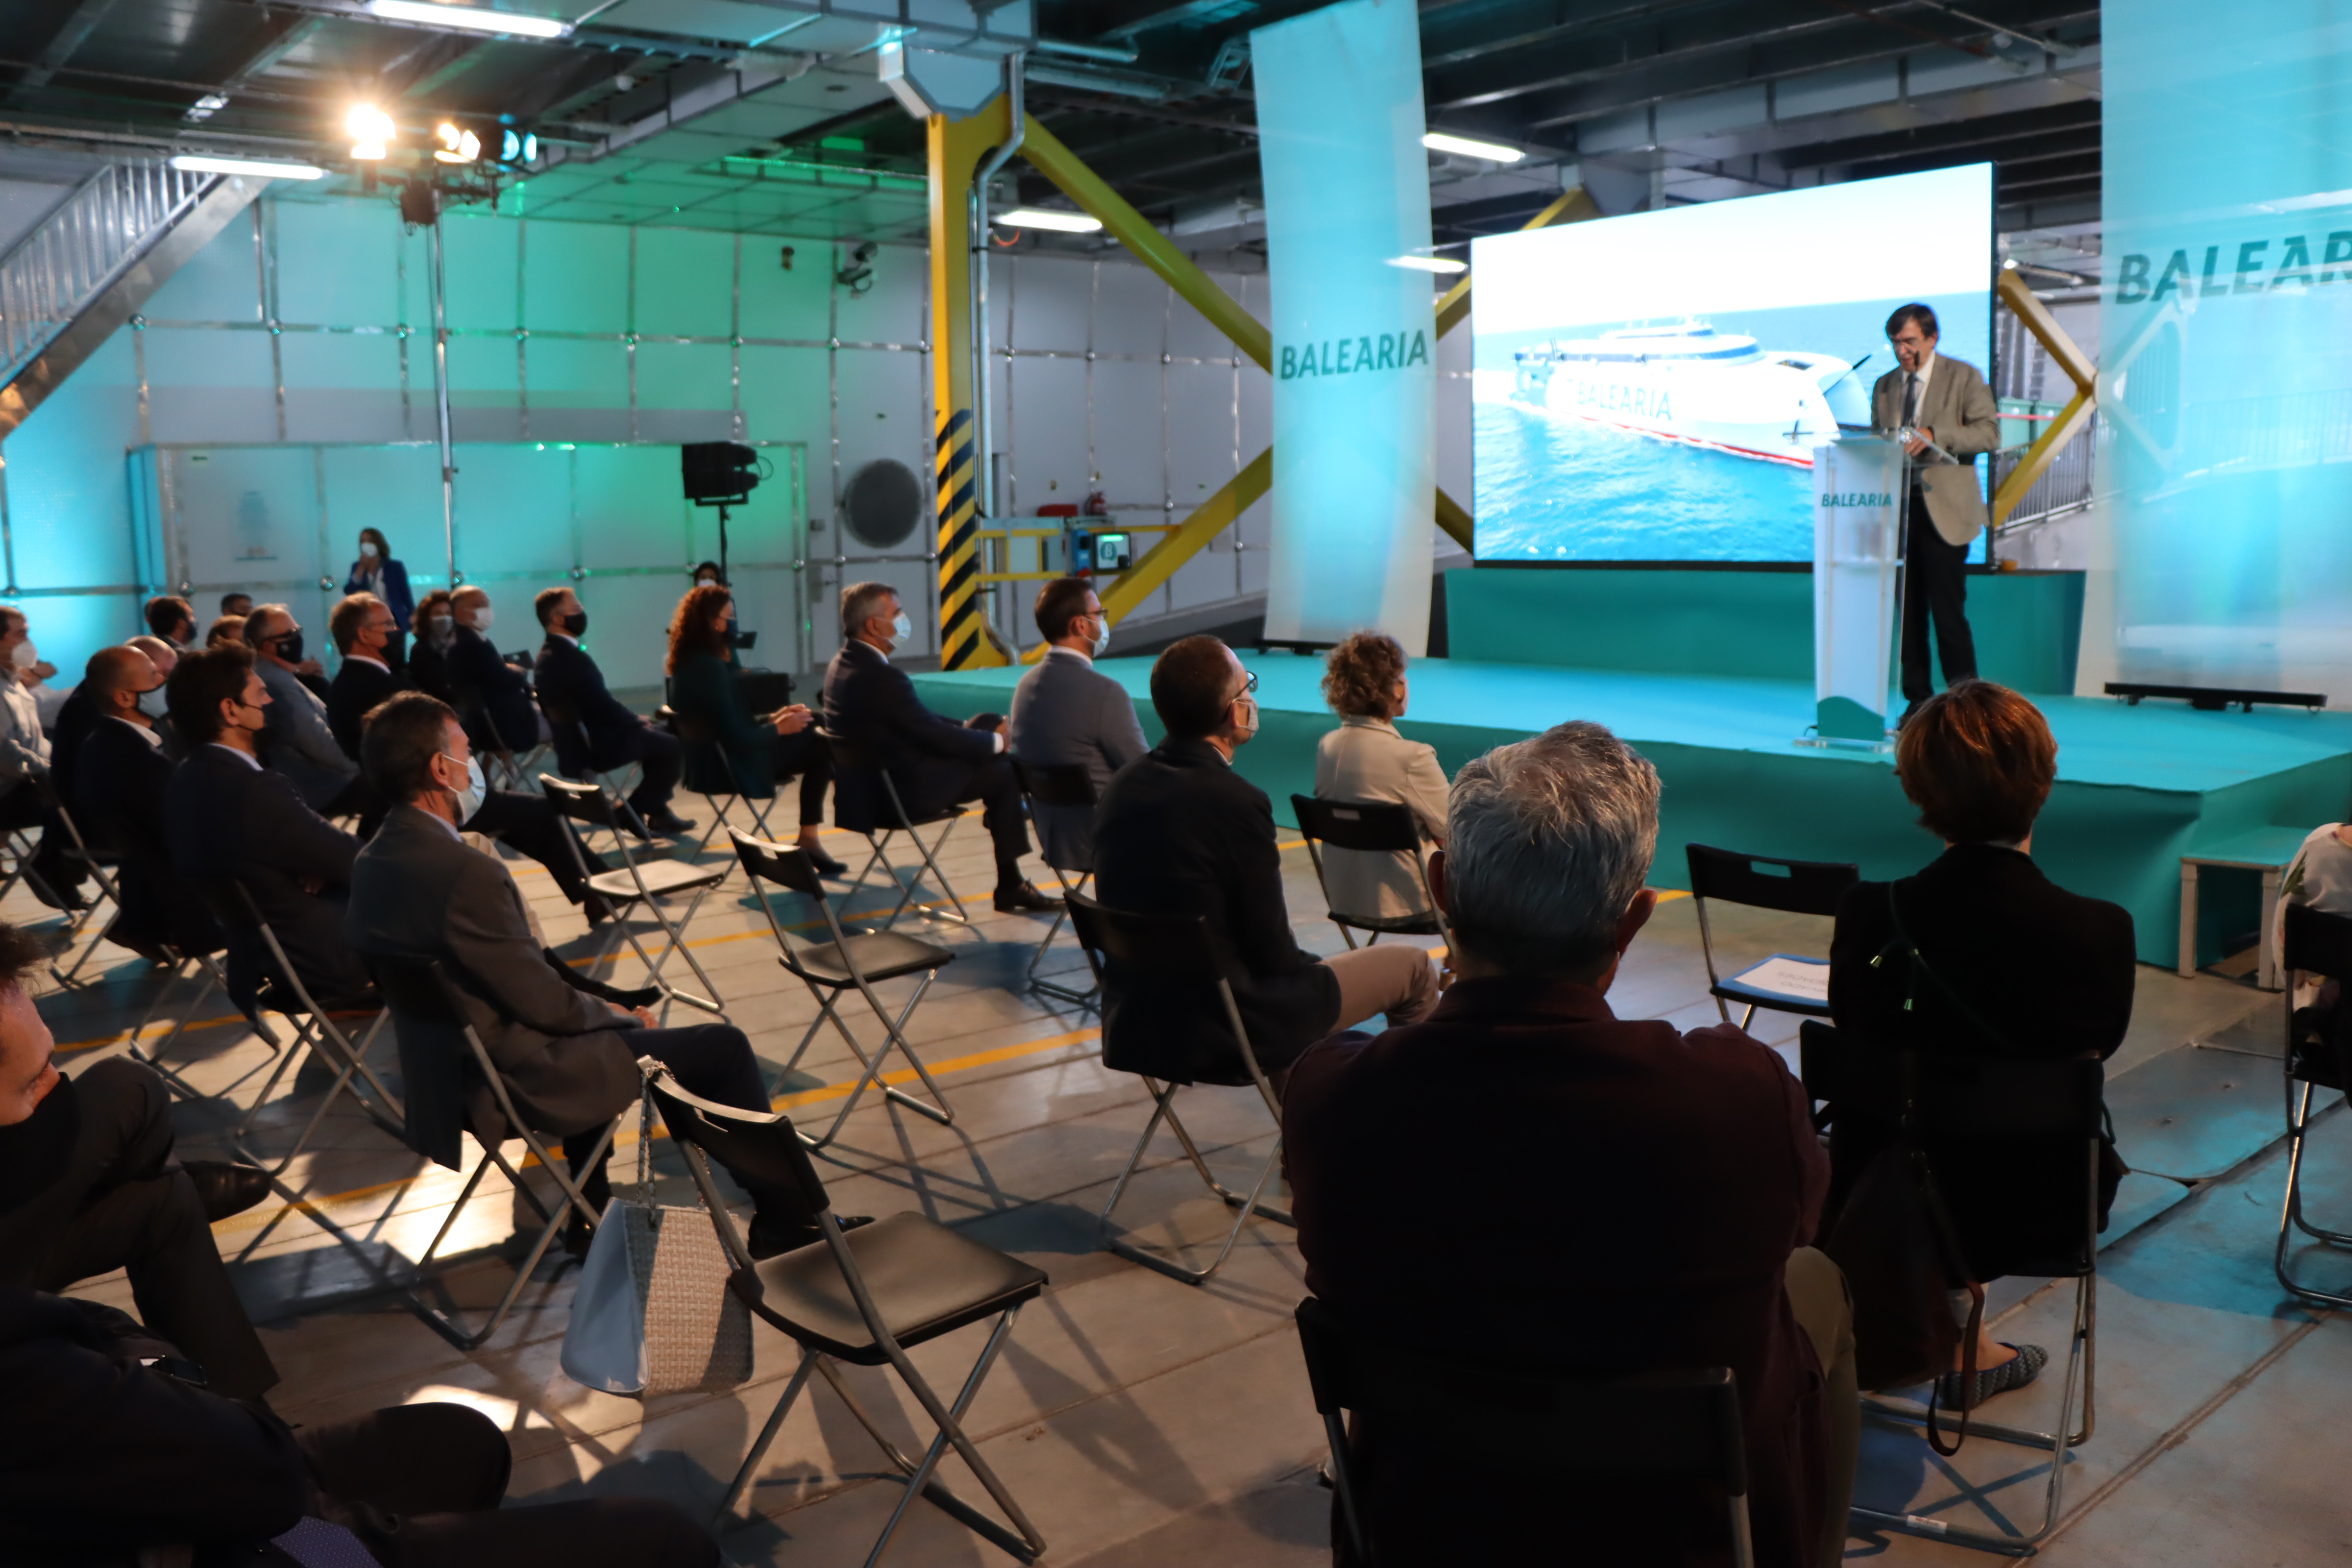 The ports of Palma and Eivissa host the presentation of Baleària's Eleanor Roosevelt, a symbol of its commitment to eco-efficiency and innovation